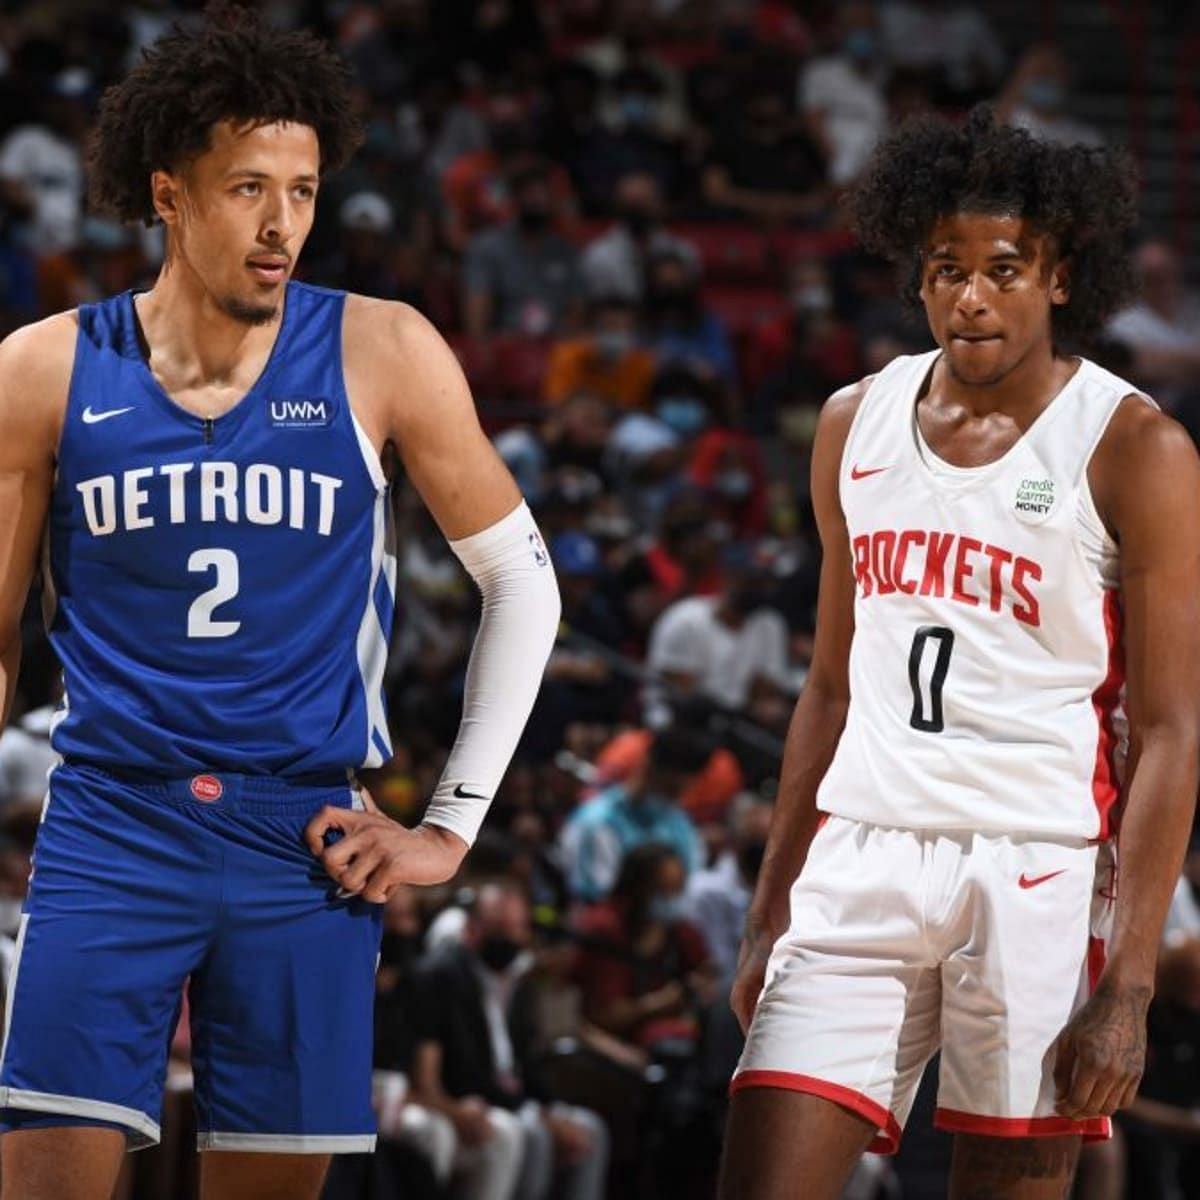 This year&#039;s top two NBA draft picks will face for the first time in a regular season game when the Detroit Pistons visit the Houston Rockets on Wednesday. [Photo: Sports Illustrated]